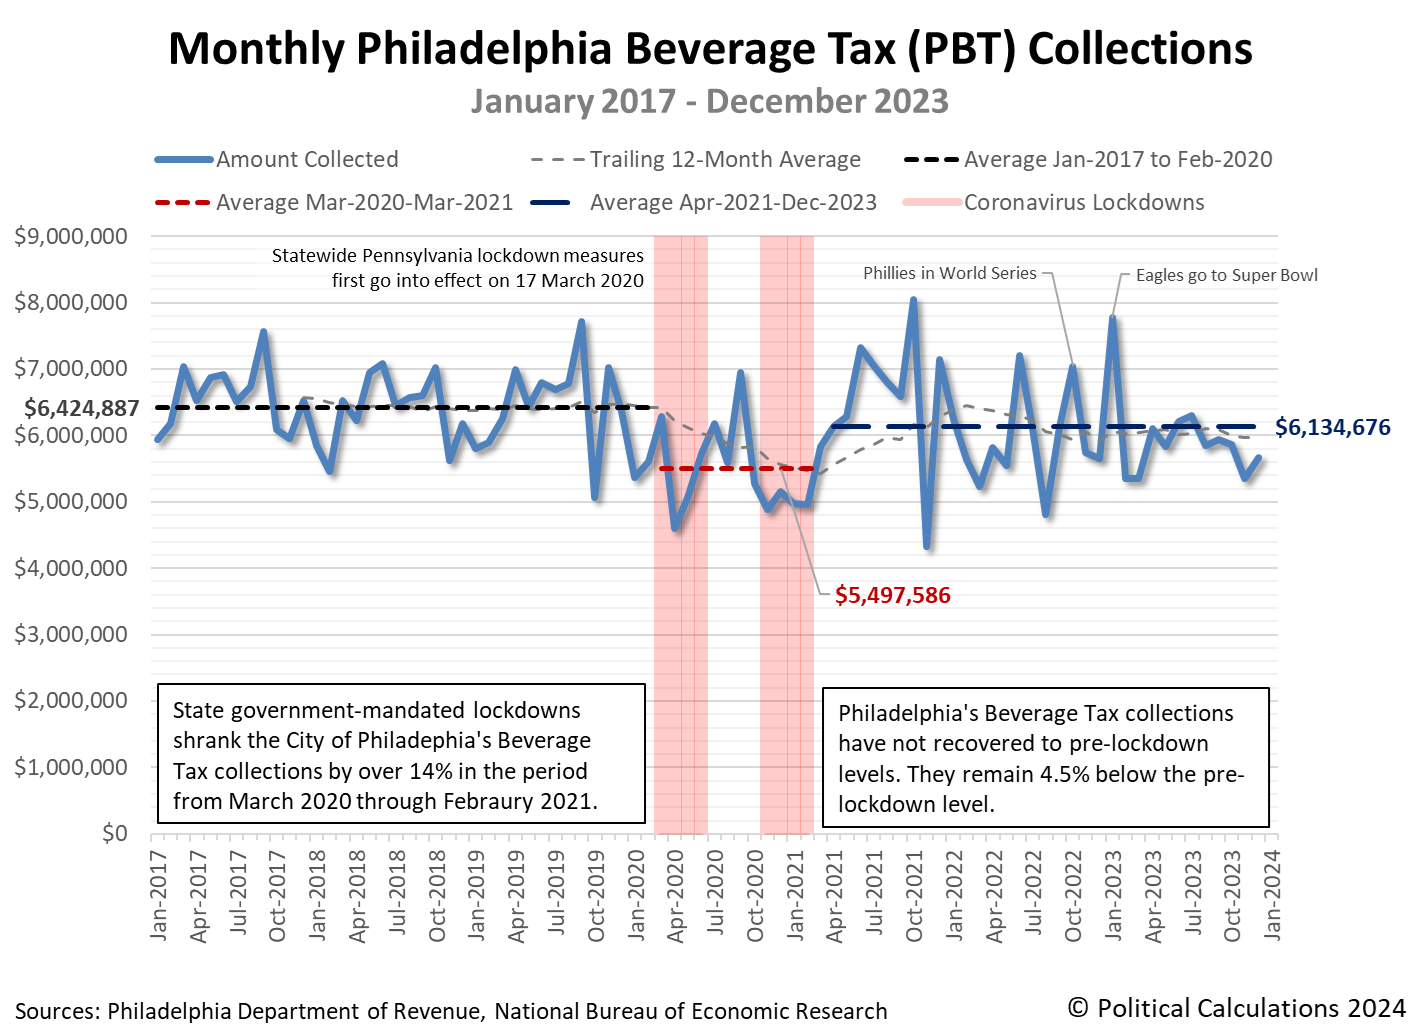 Monthly Philadelphia Beverage Tax (PBT) Collections, January 2017 - December 2023